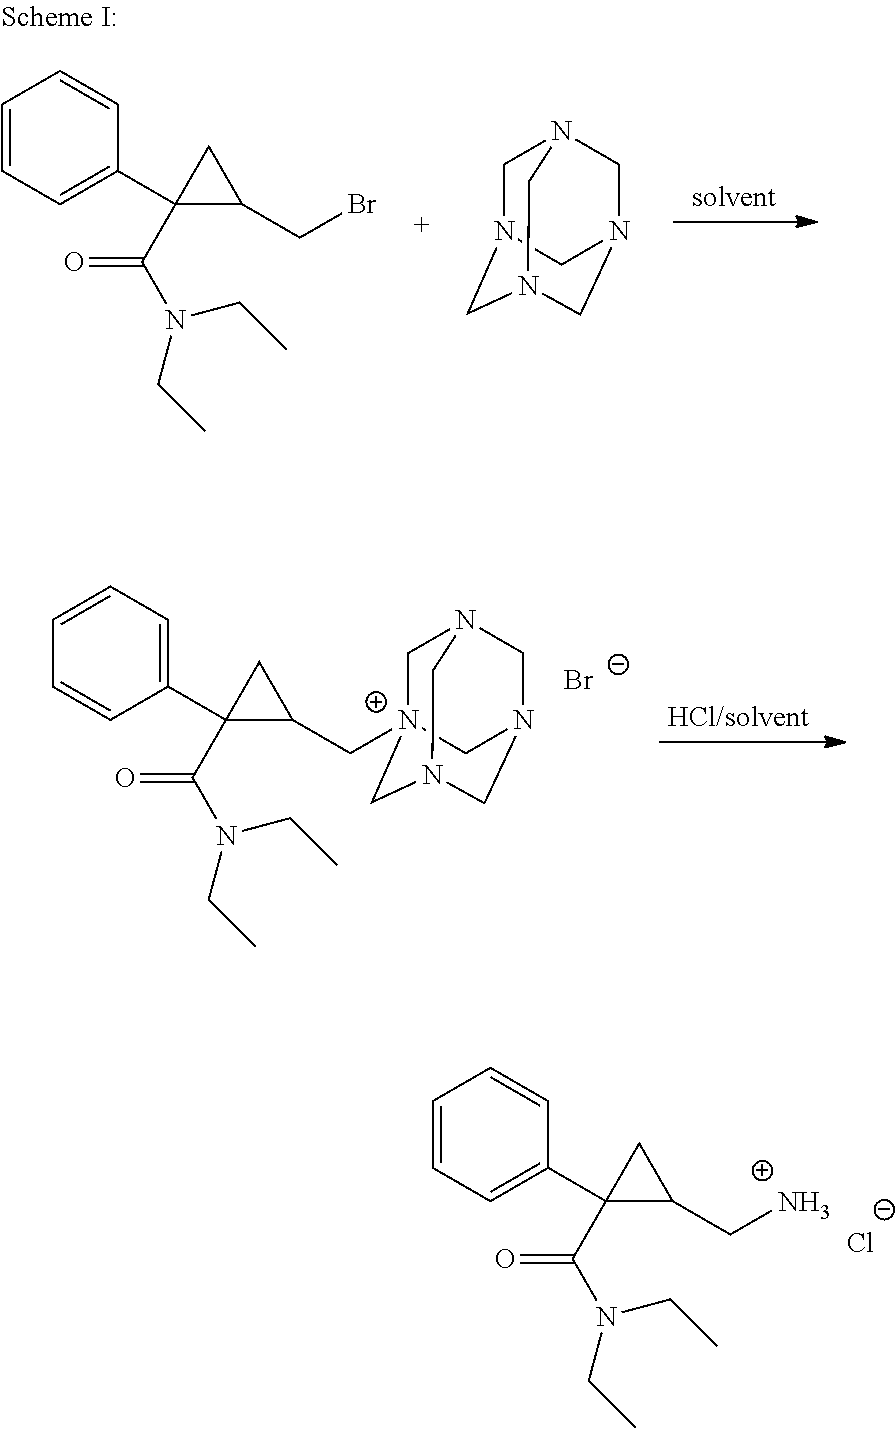 Process for the preparation of pharmaceutically acceptable salts of racemic milnacipran and its optical enantiomers thereof